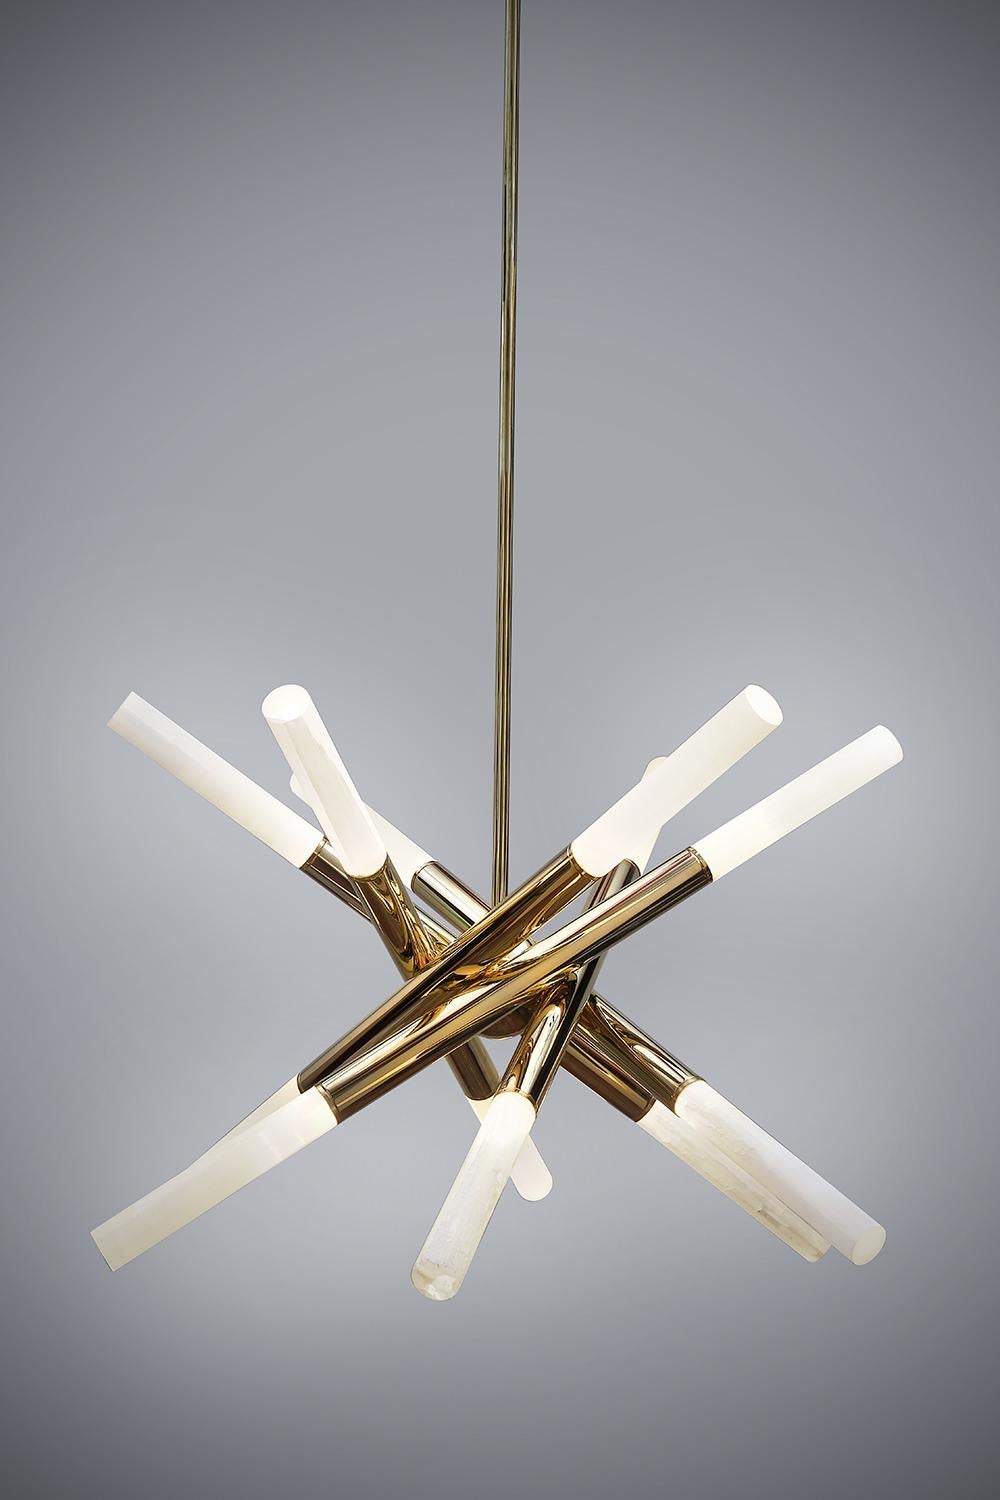 Our Burst Chandelier is an incredible statement piece of art. Handcrafted and fixed to a central sphere, twelve large polished rock crystal rods rotate to create a burst. An absolute show stopper in any setting.
Each light is limited in the number